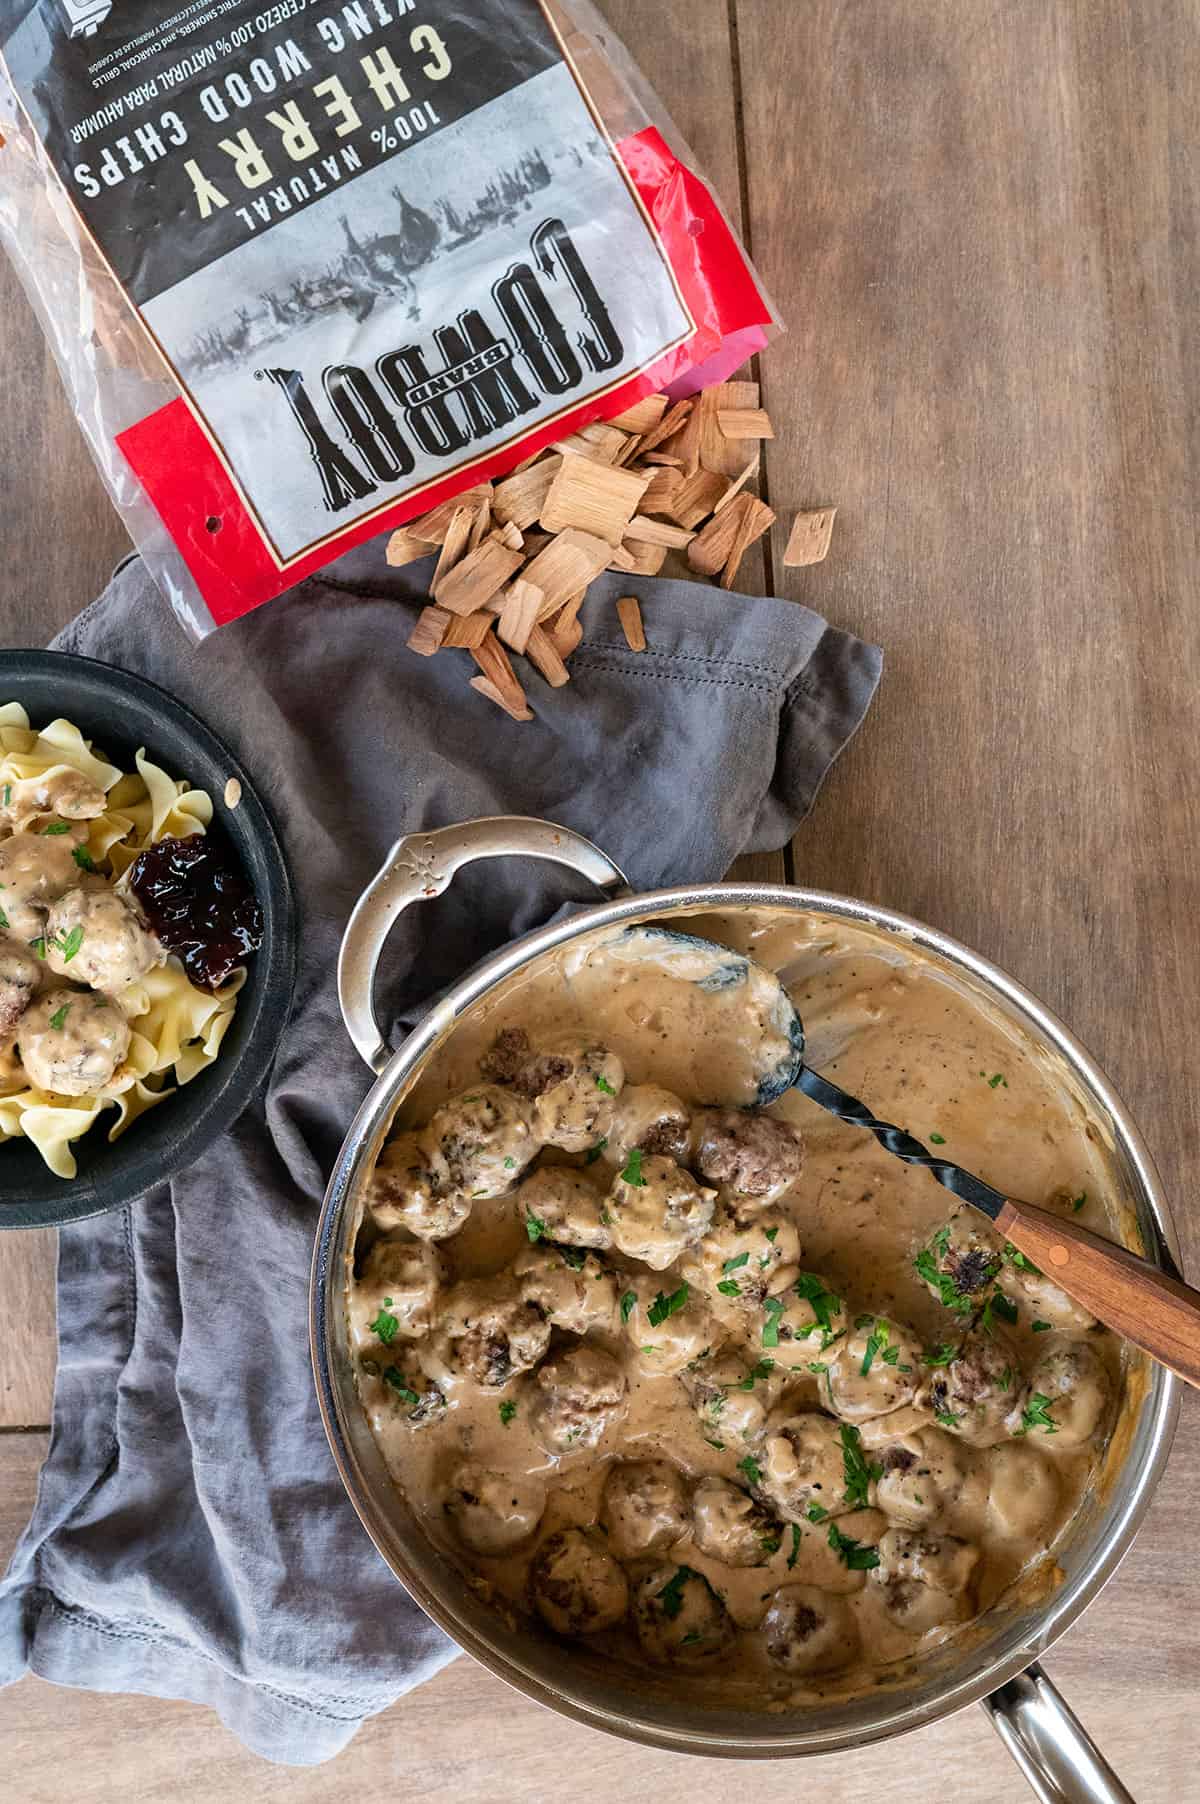 skillet and bowl of Swedish meatballs with bag of Cowboy charcoal wood chips spilled on table.